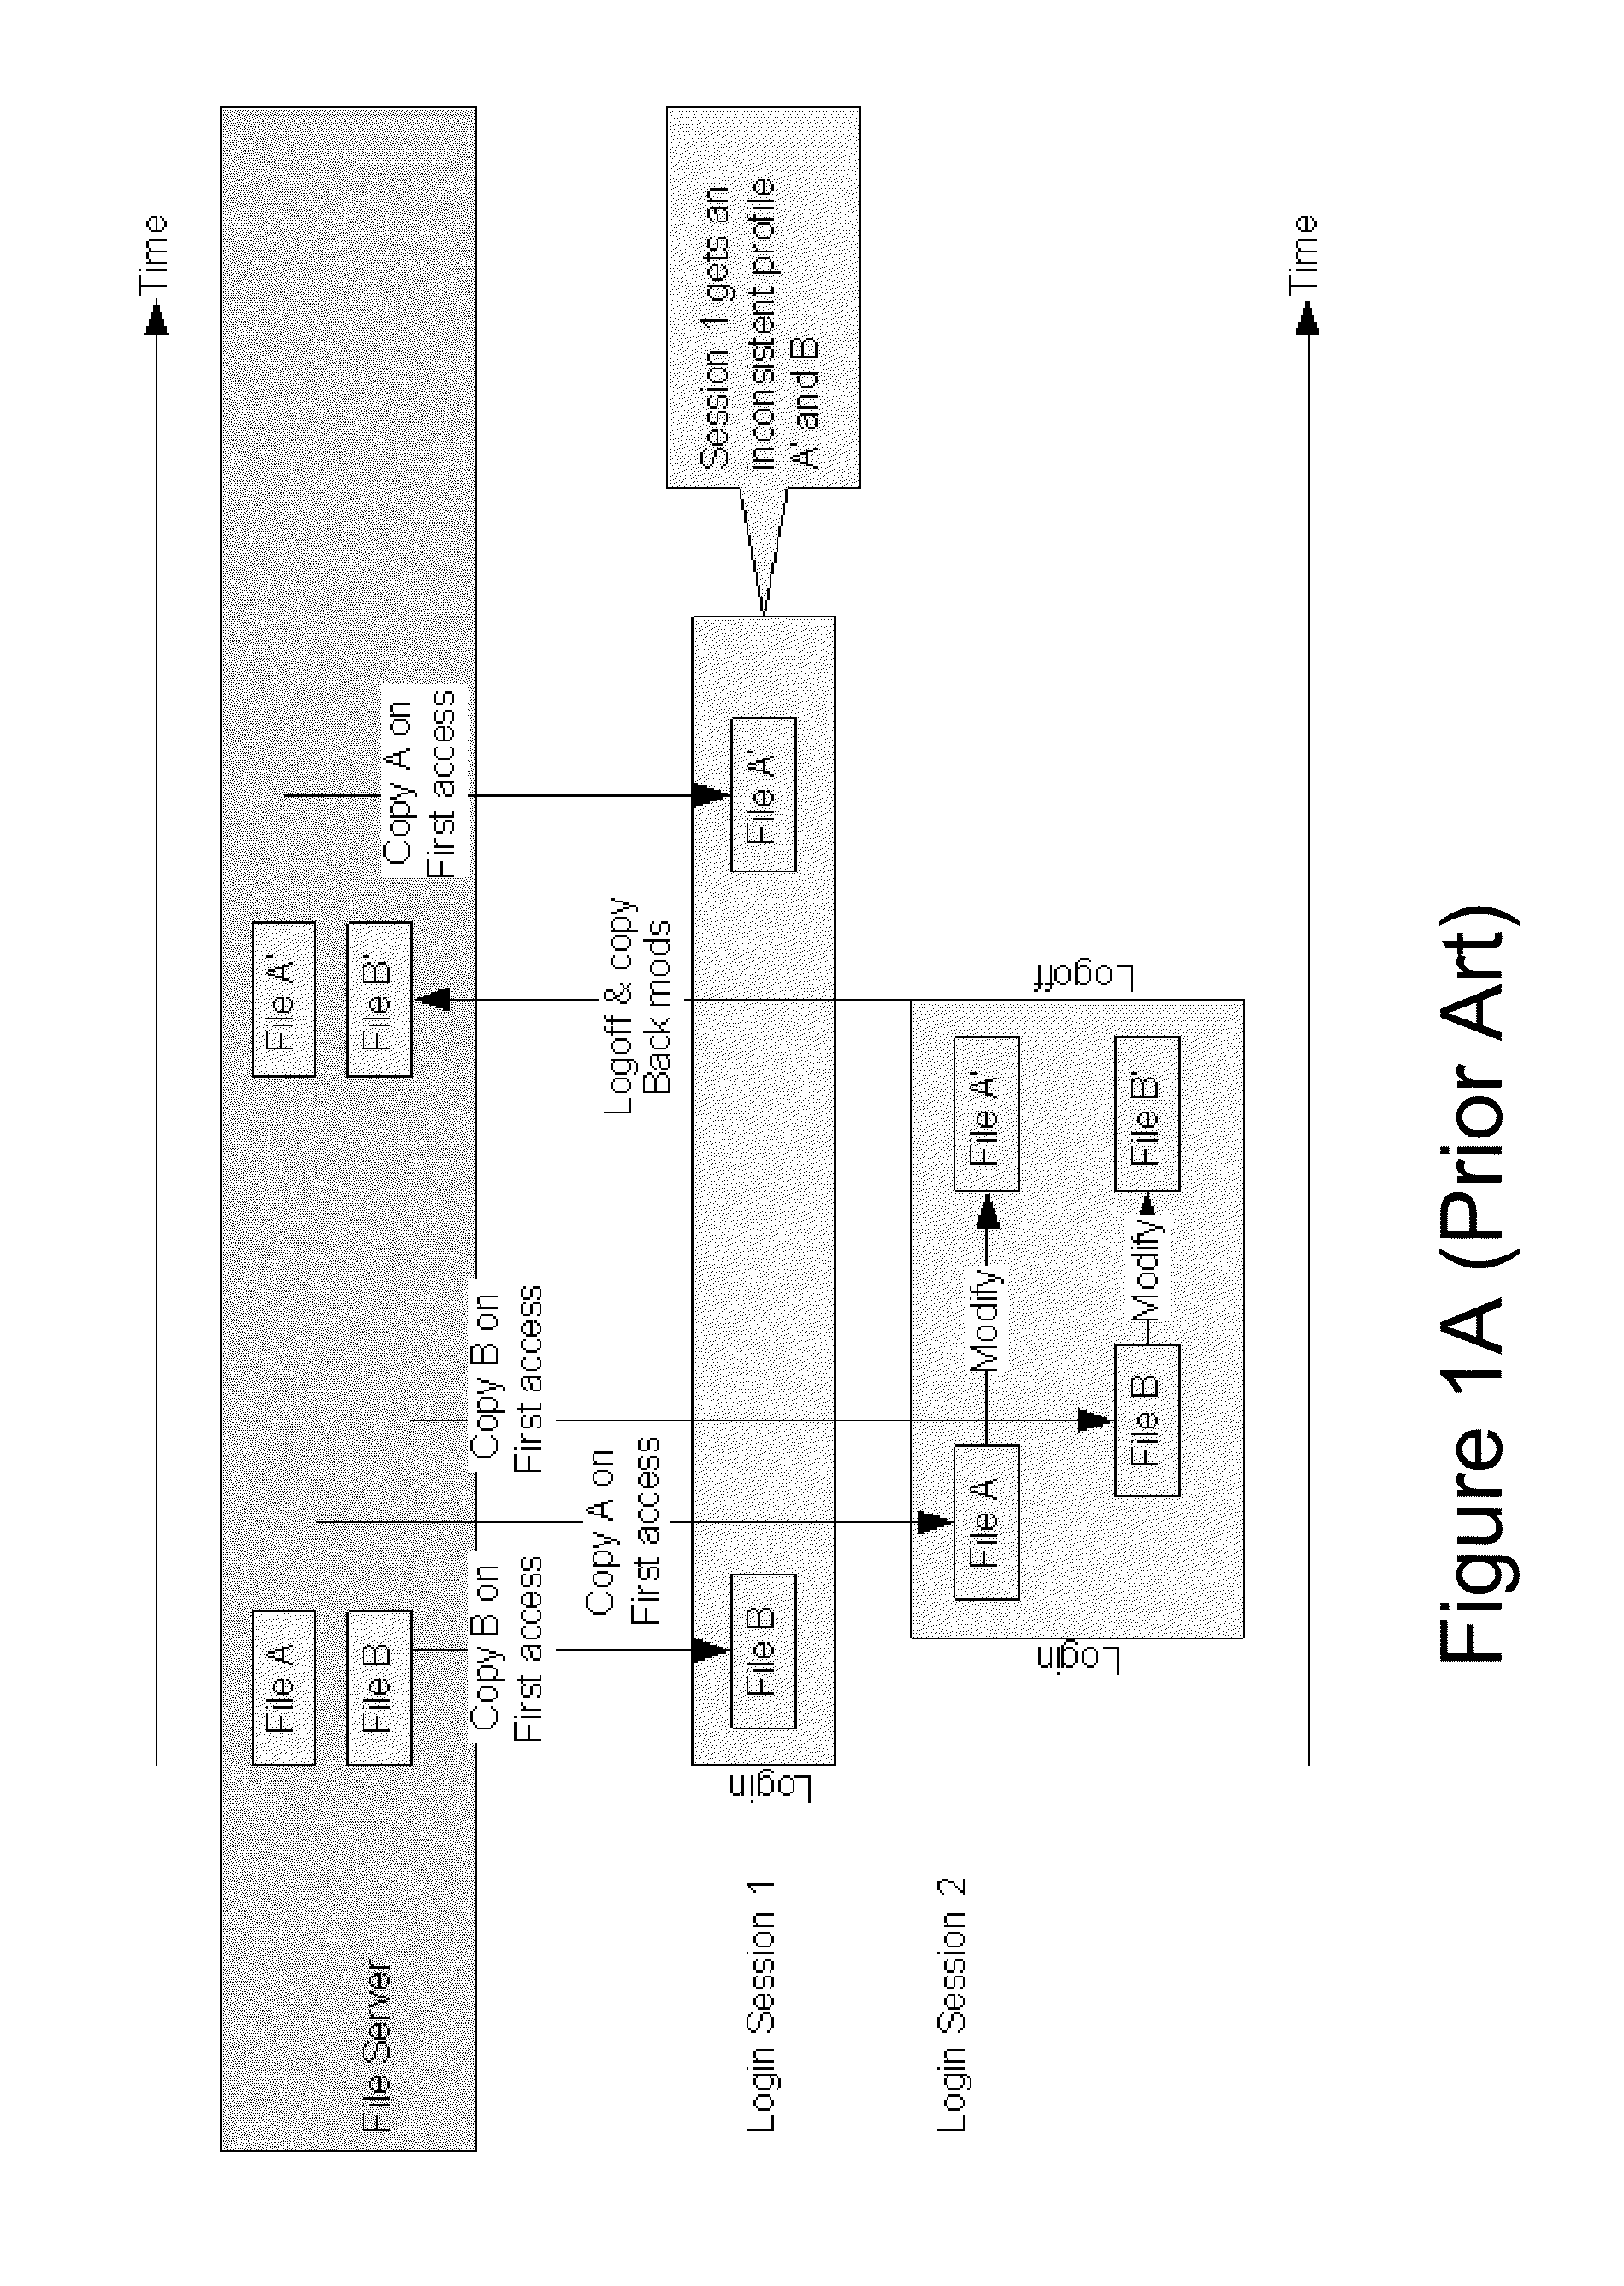 Methods and systems for providing a consistent profile to overlapping user sessions